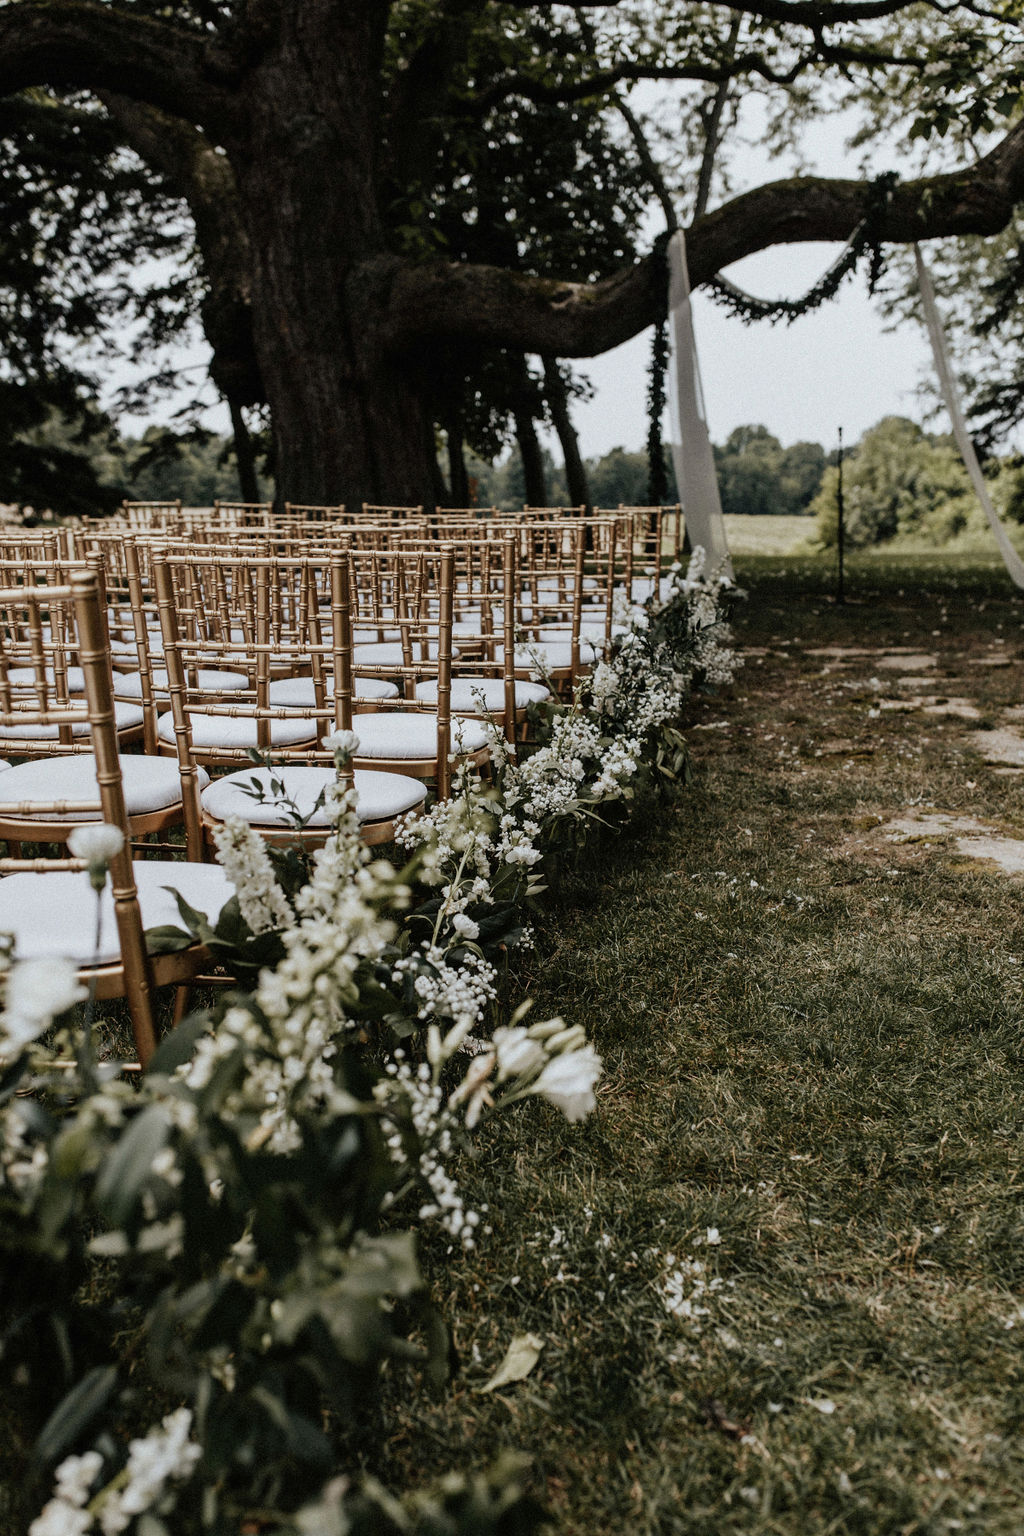 Flowers lining the edge of the aisle at an outdoor ceremony